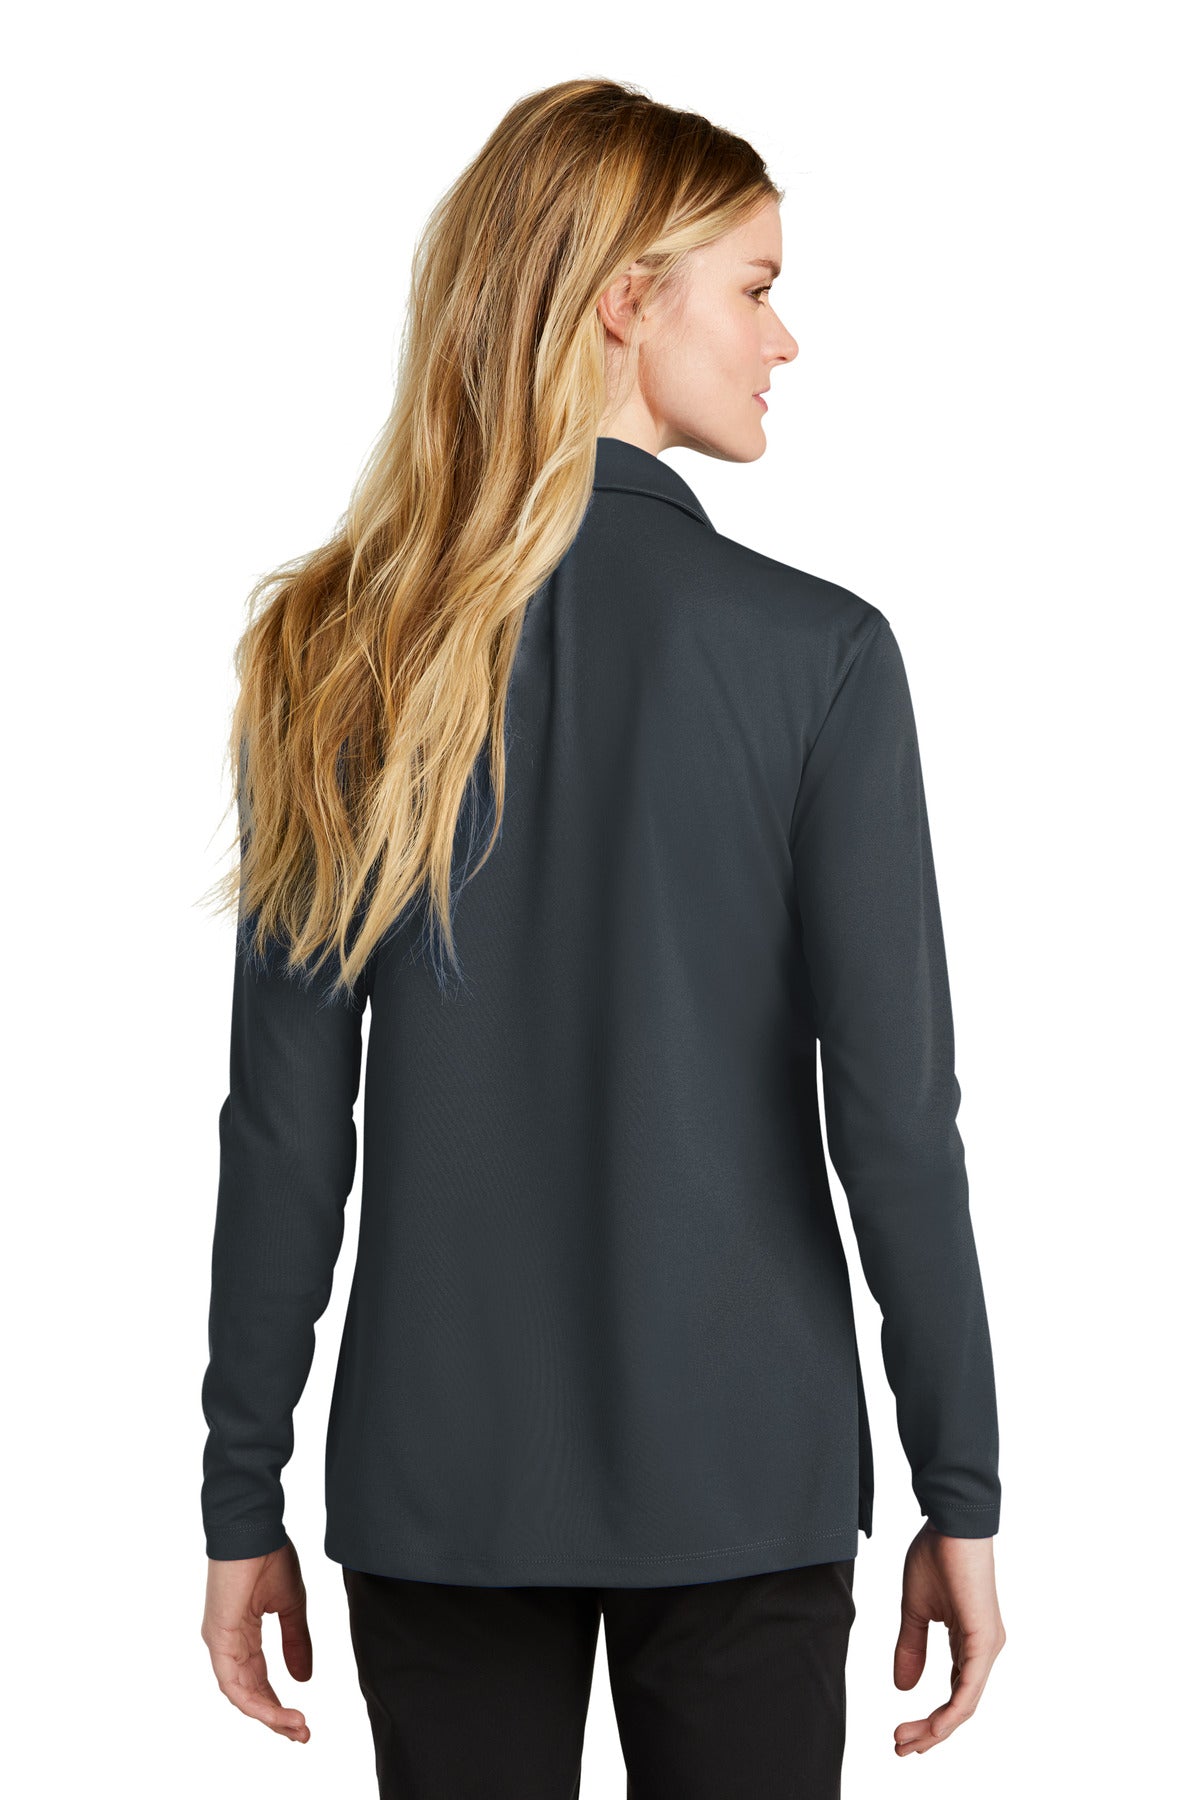 Swaasi Core - Nike® LADIES LONG-SLEEVE Dri-FIT Micro Pique 2.0 Polo with EMB Logo